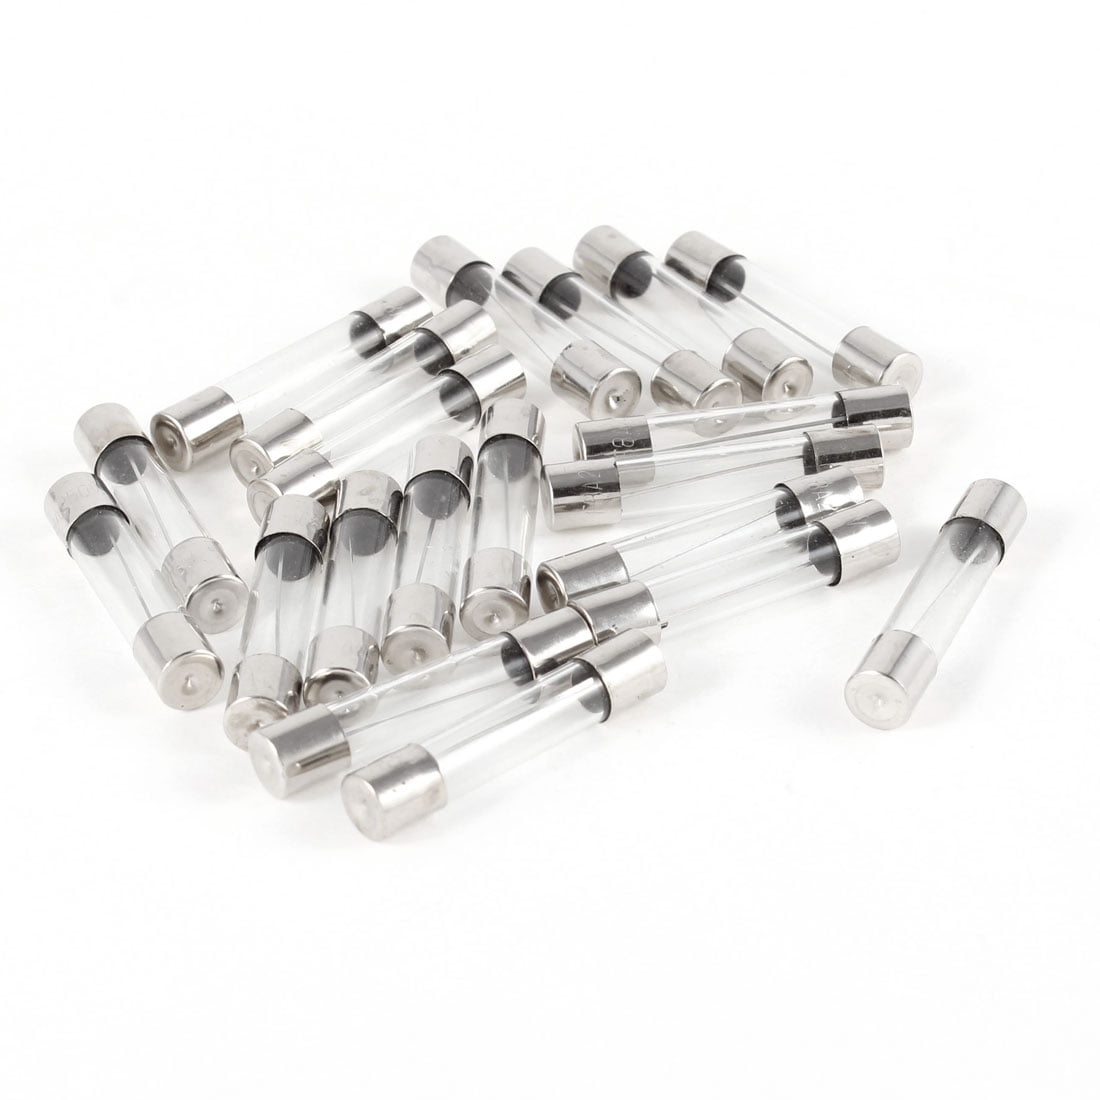 GFORTUN 100 Pcs 250V 10A Fast Blowing Quick Acting Glass Tube Fuses 5 x 20mm for Car 